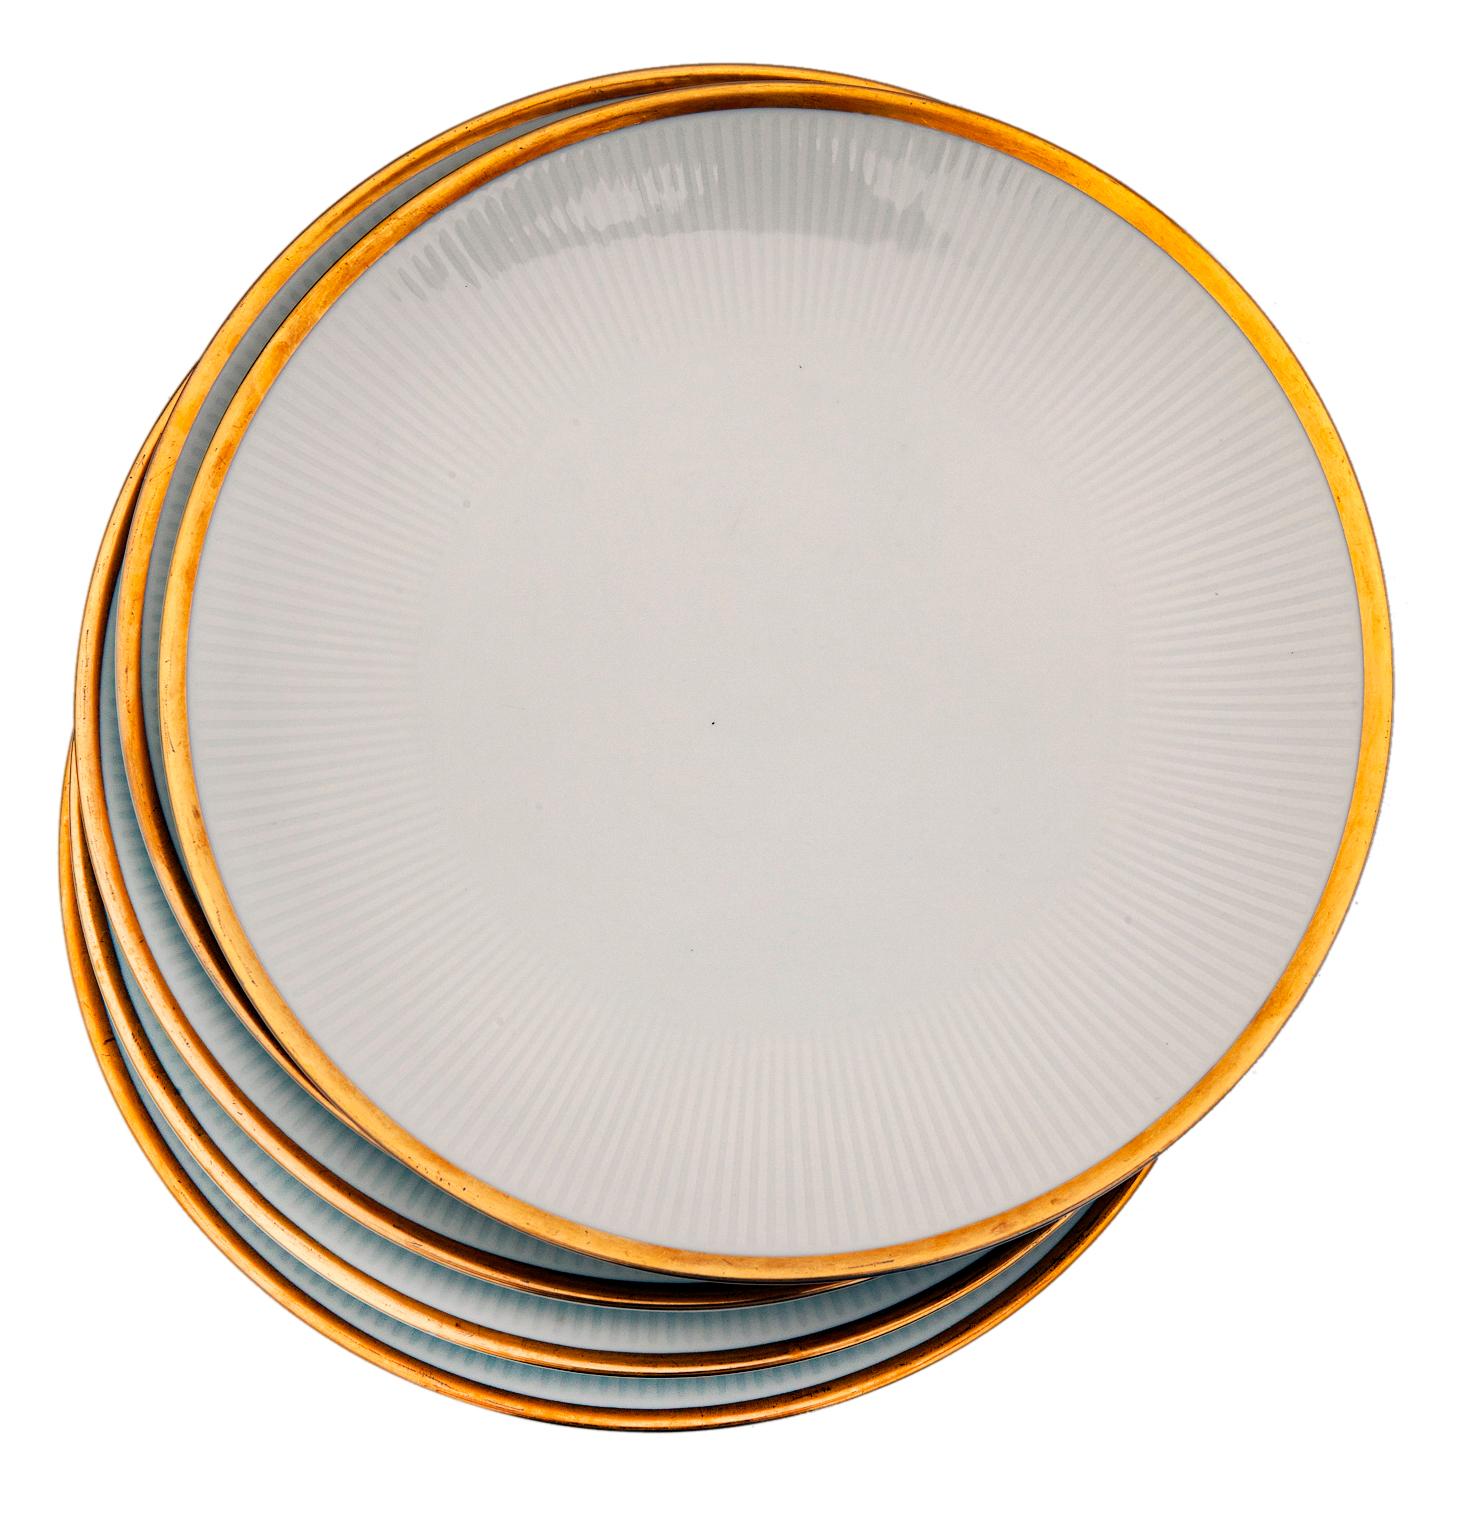 Mitterteich Eternal Dinner Plates ; Set of 12 In Excellent Condition For Sale In Malibu, CA